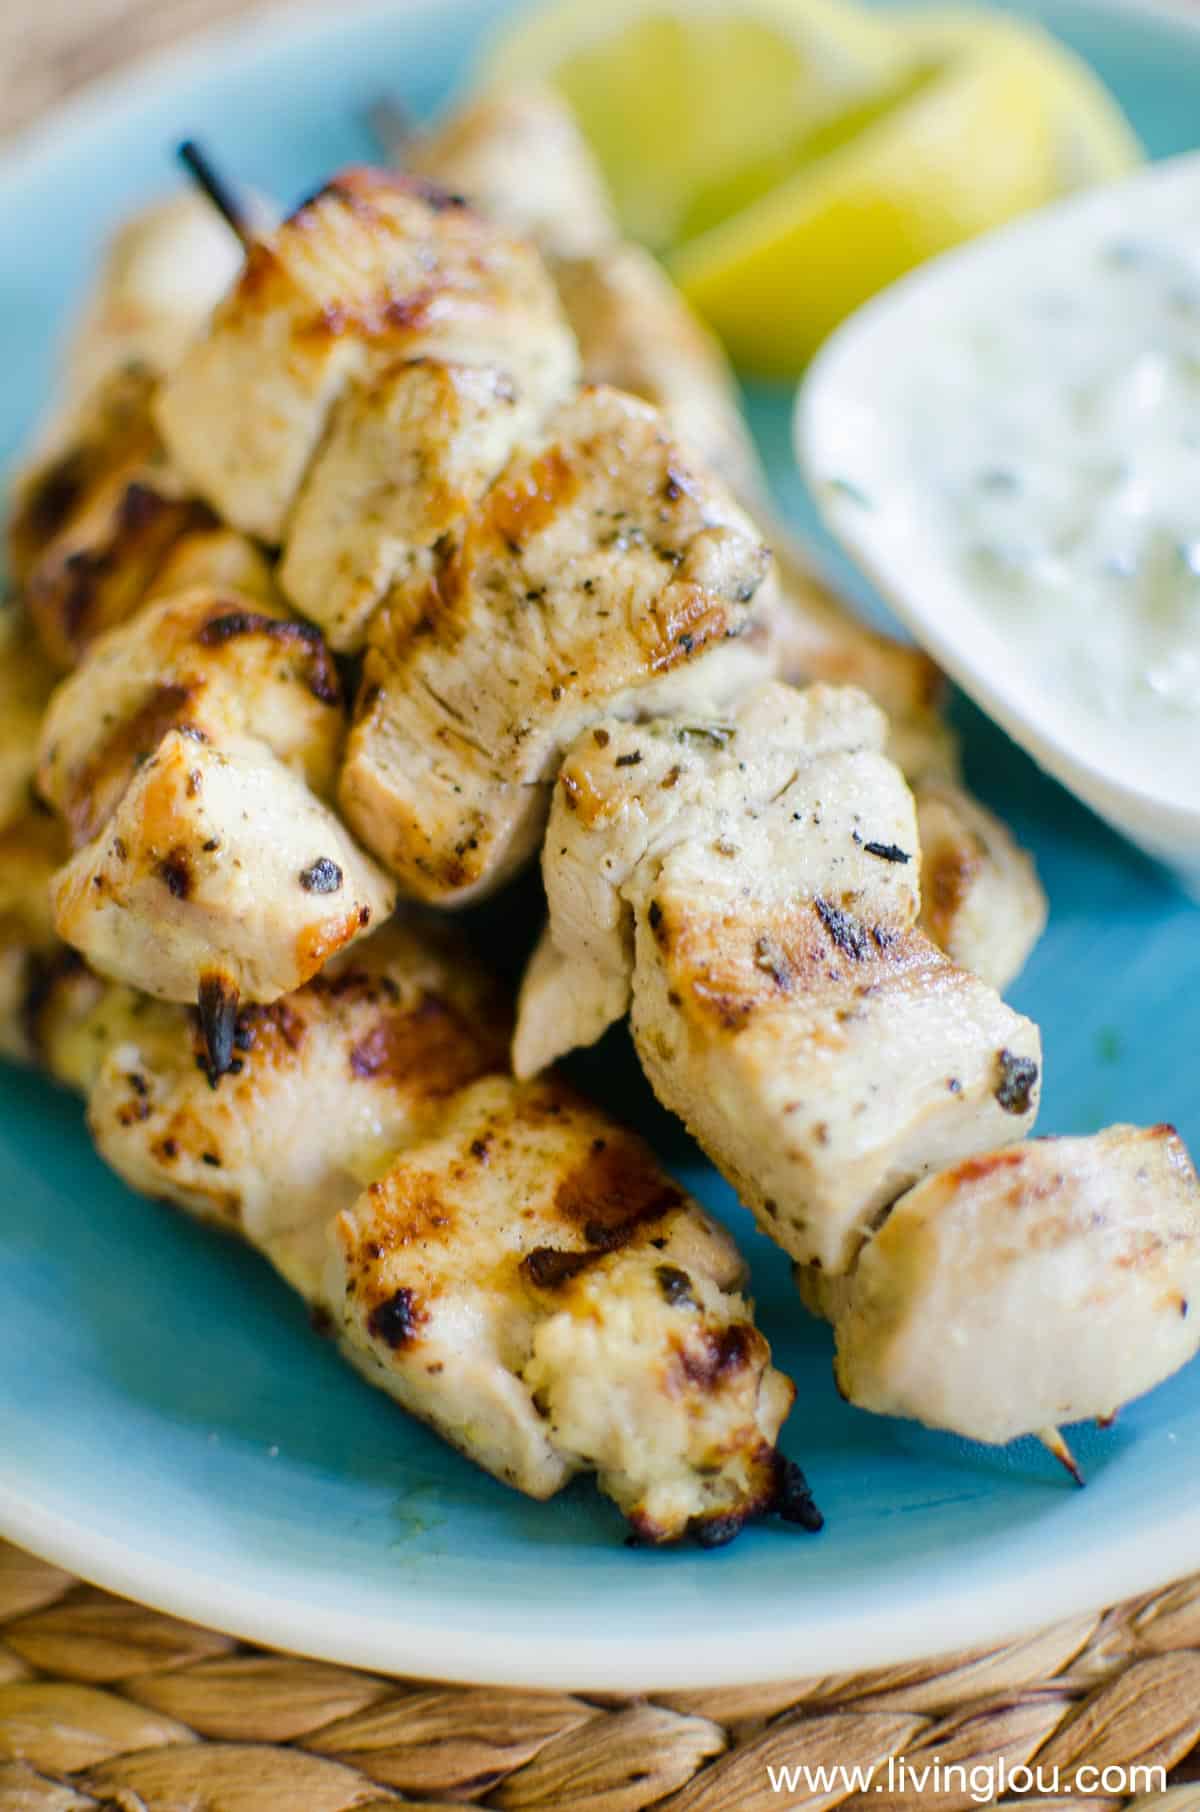 grilled chicken on a stick on a plate with creamy sauce and lemon